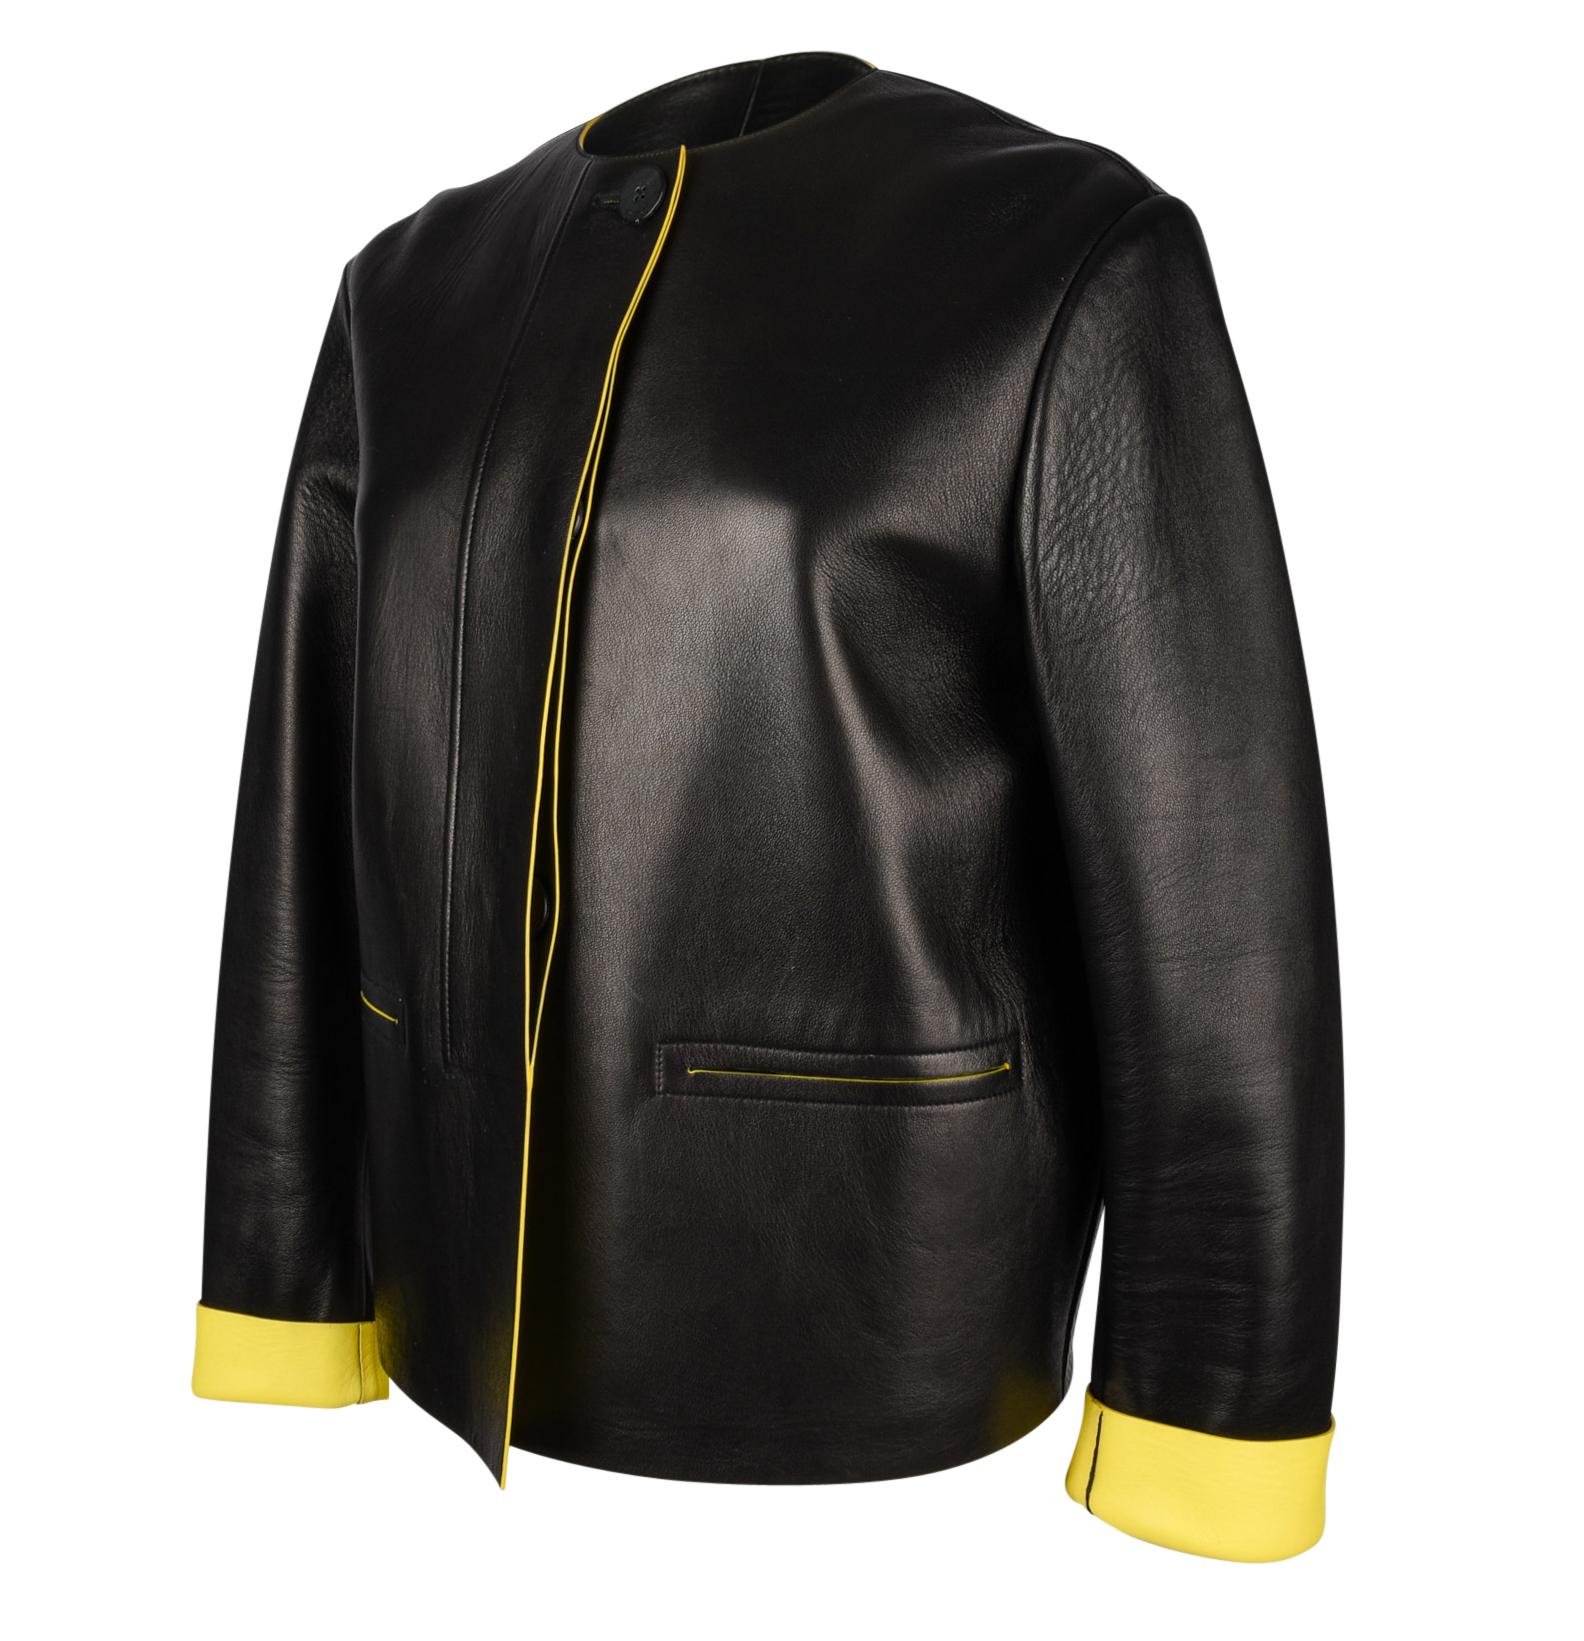 Guaranteed authentic Celine 3 button single breast plush leather jacket.  
Black with bold yellow interior and fine piping at slot pockets.
Wear cuffs folded to reveal yellow. 
Beautifully detailed placket for hidden buttons.
Exquisite!
Warm for